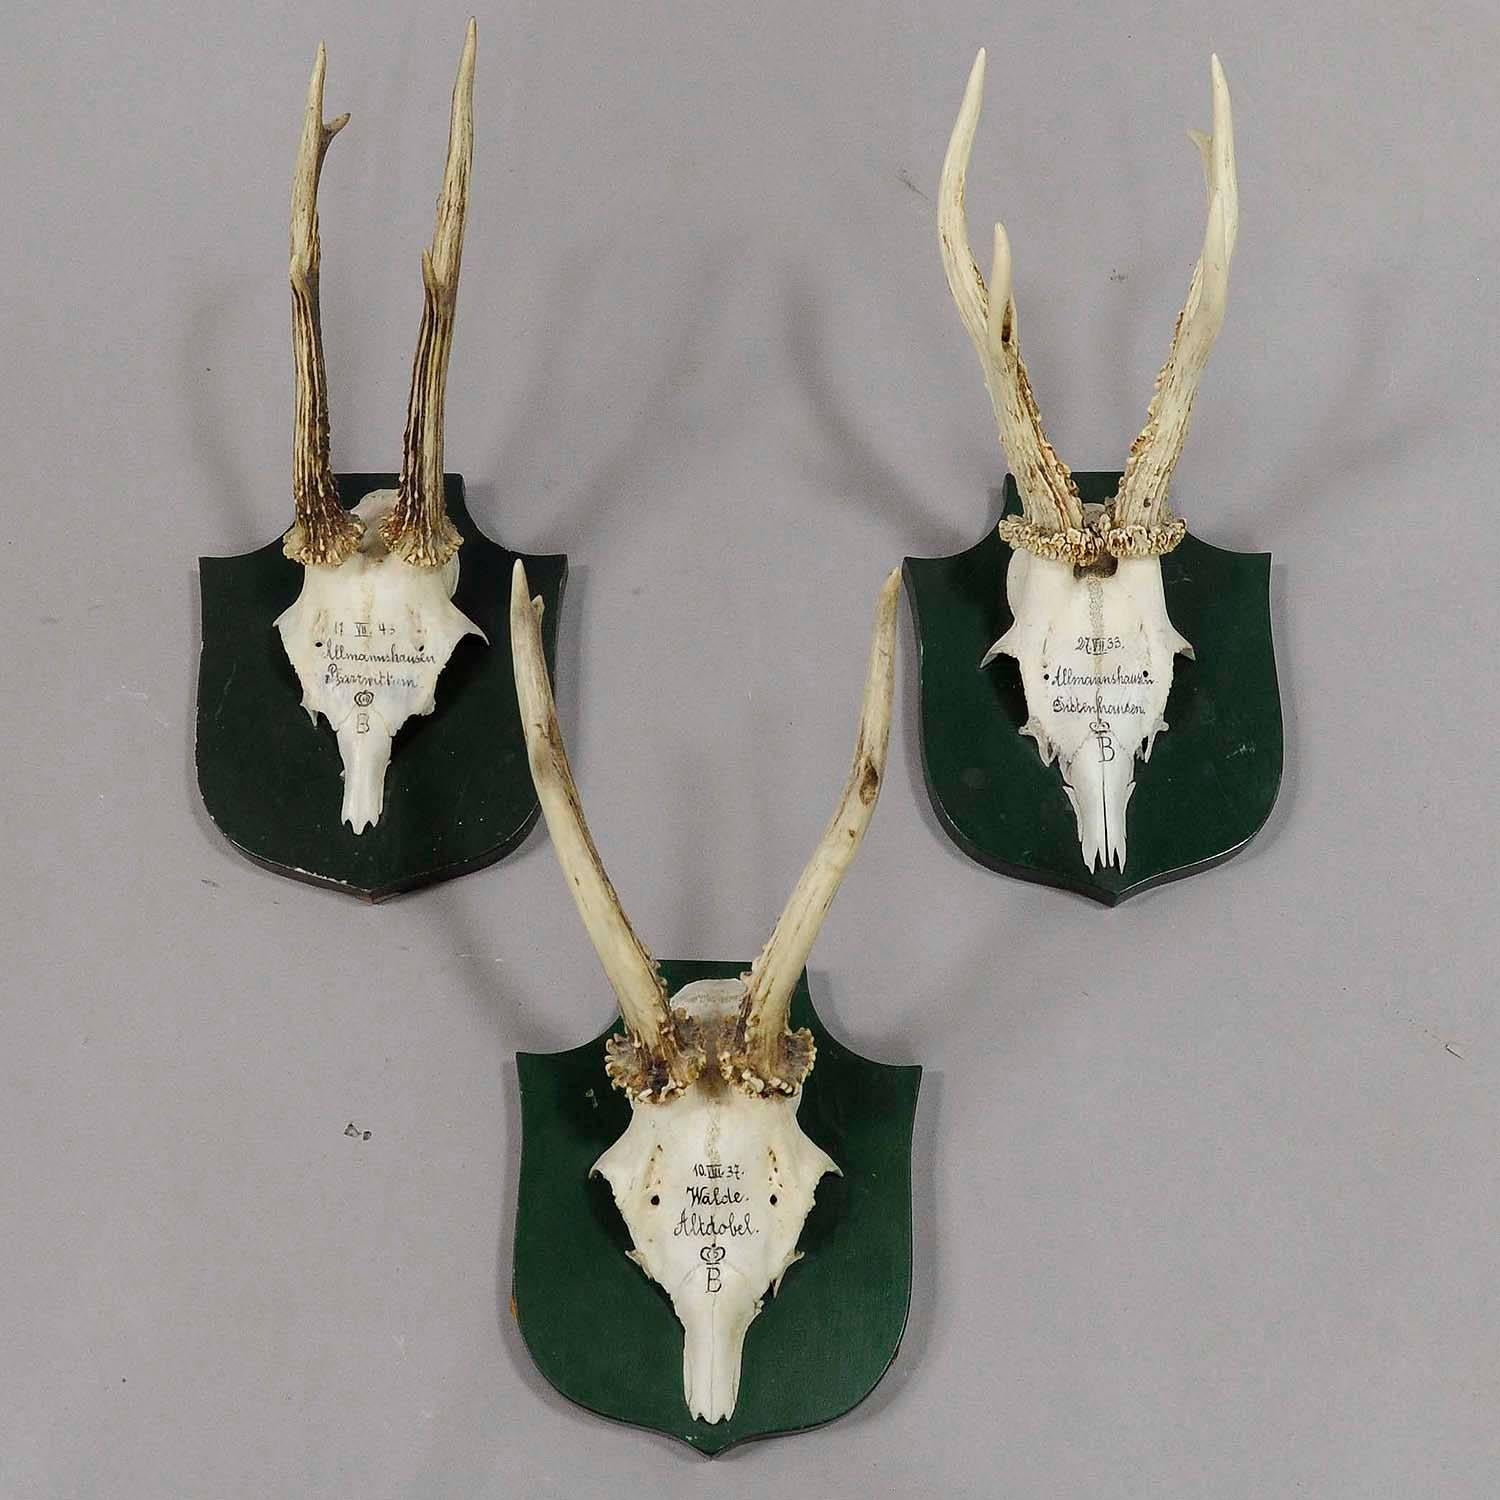 a set of six antique black forest deer trophies on wooden plaques. remaining from the stately home of palace salem in south germany. all trophies were shot by members of the family of margrave maximilian of baden. handwritten inscriptions on the